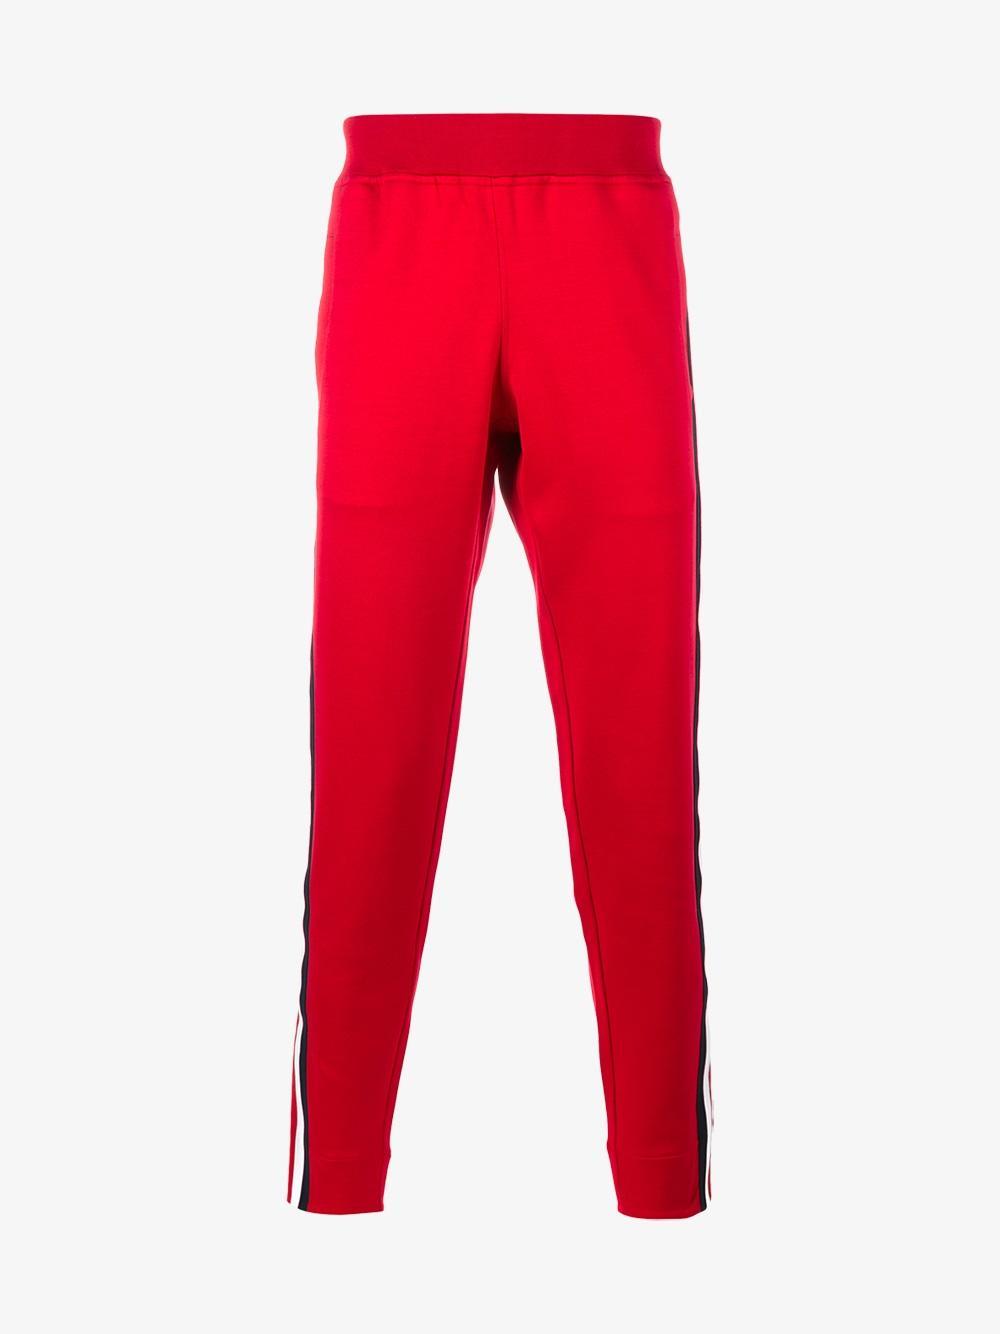 Gucci Cotton Striped Panel Track Pants in Red for Men - Lyst